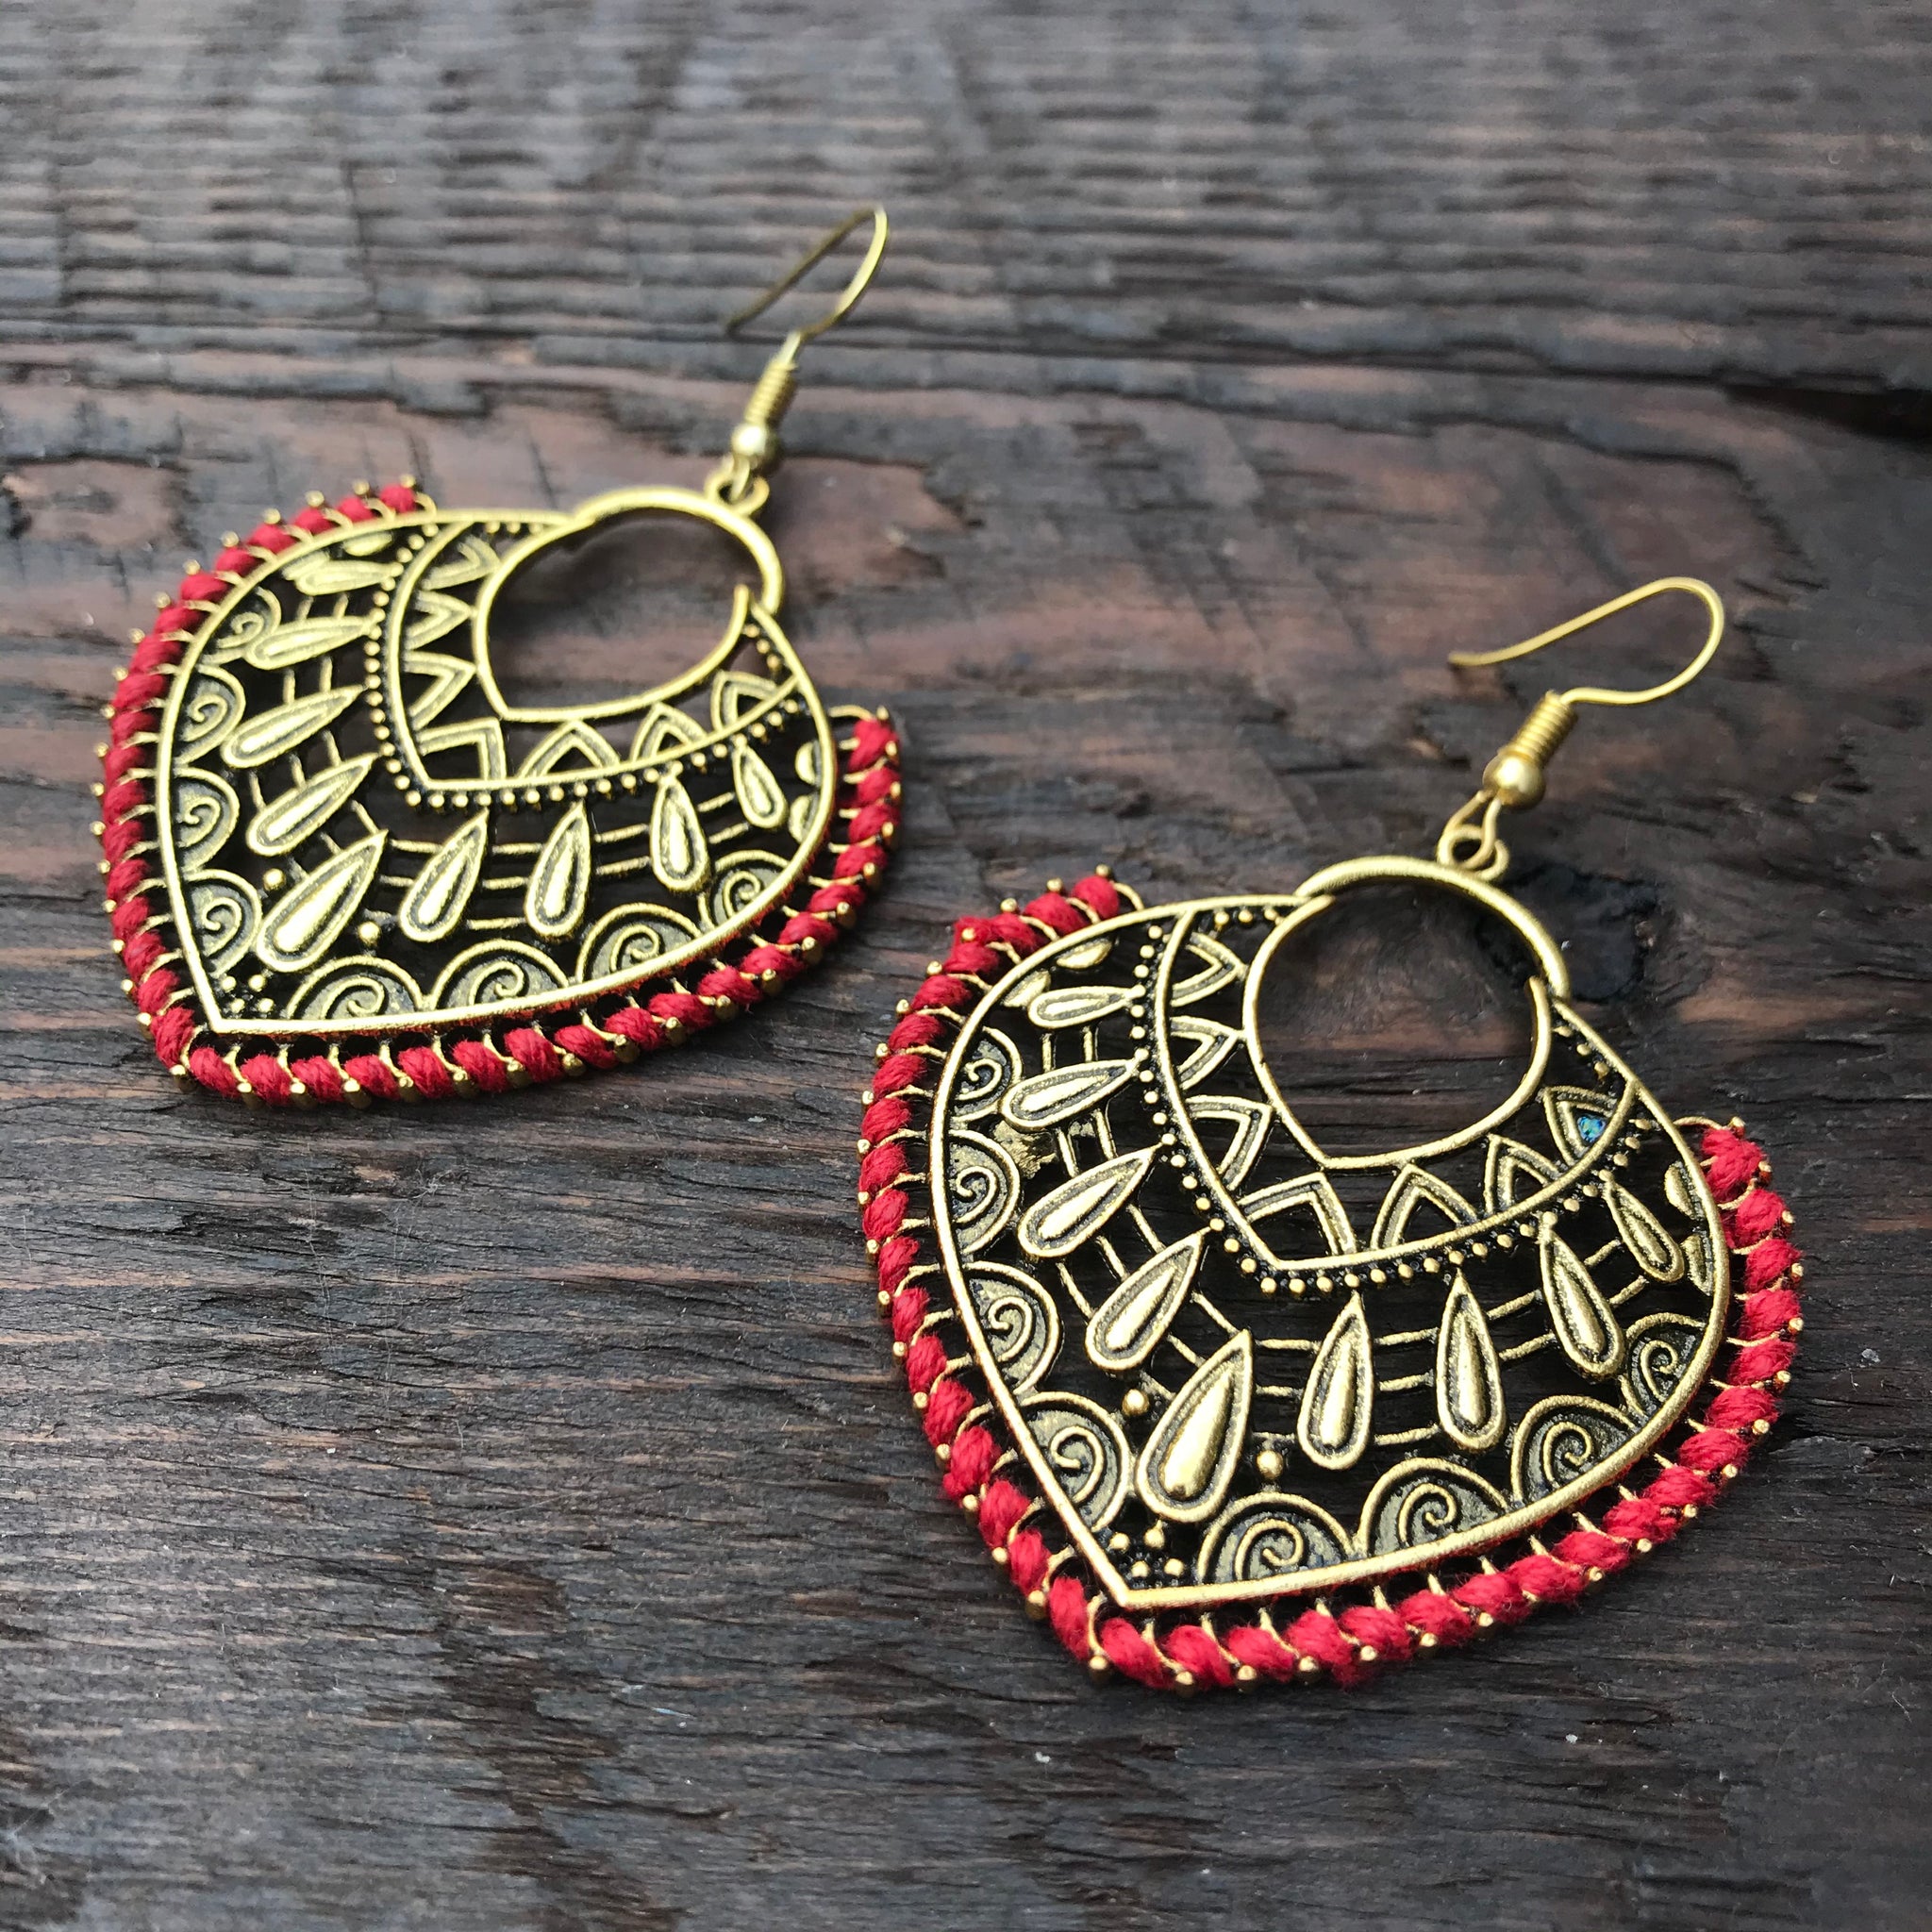 'Ethnic Vibes' Heart Shaped Design Statement Earrings